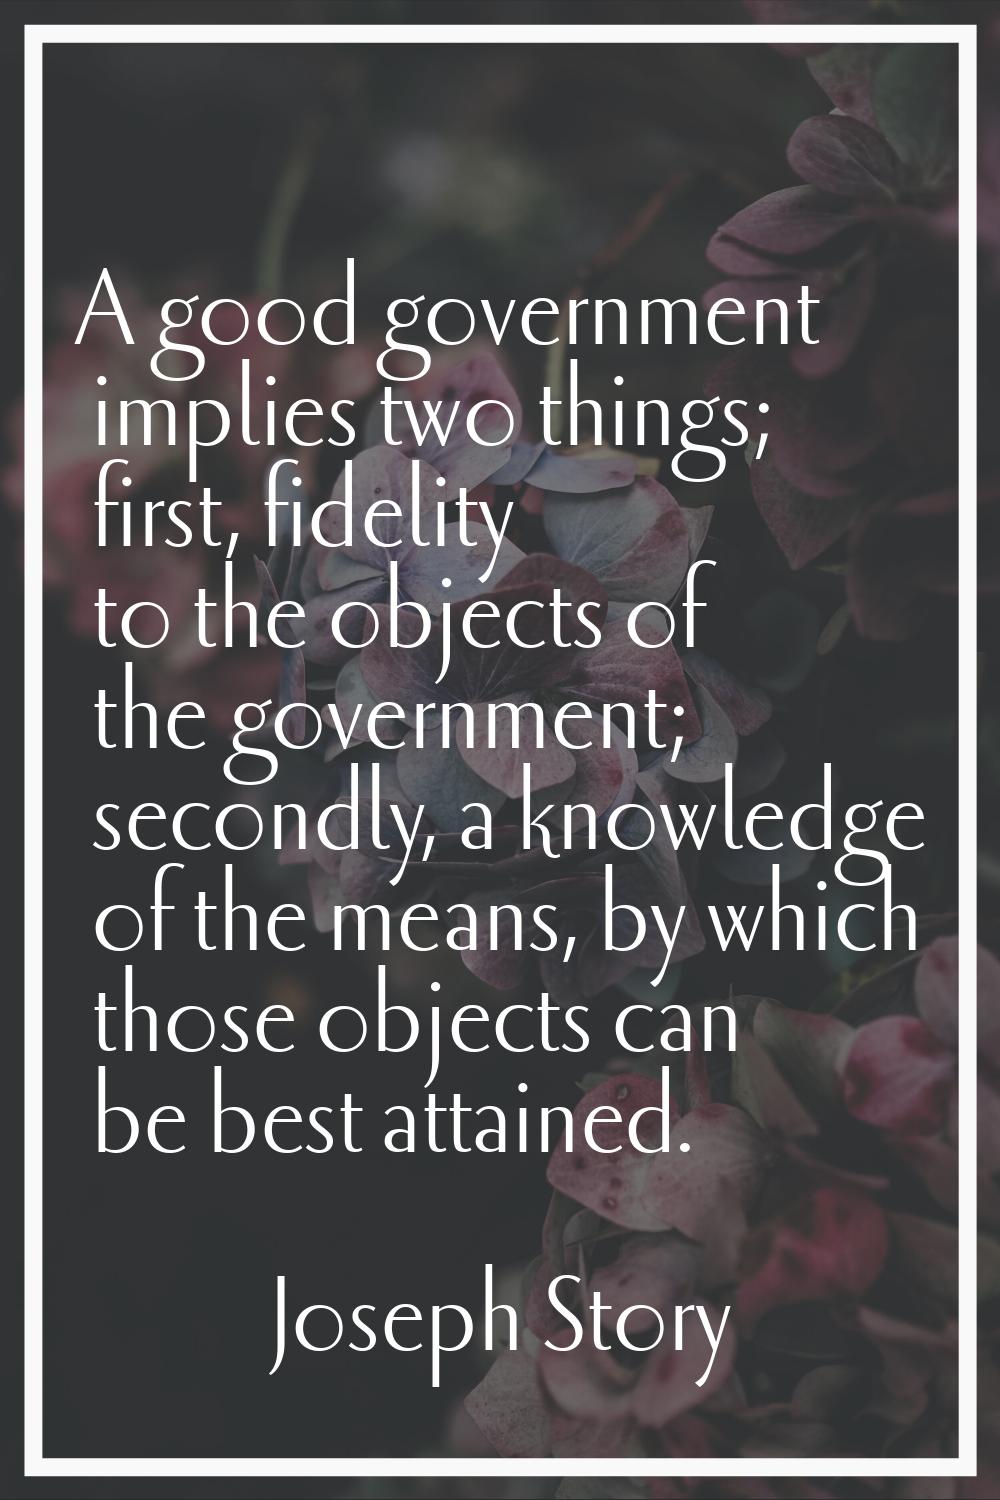 A good government implies two things; first, fidelity to the objects of the government; secondly, a